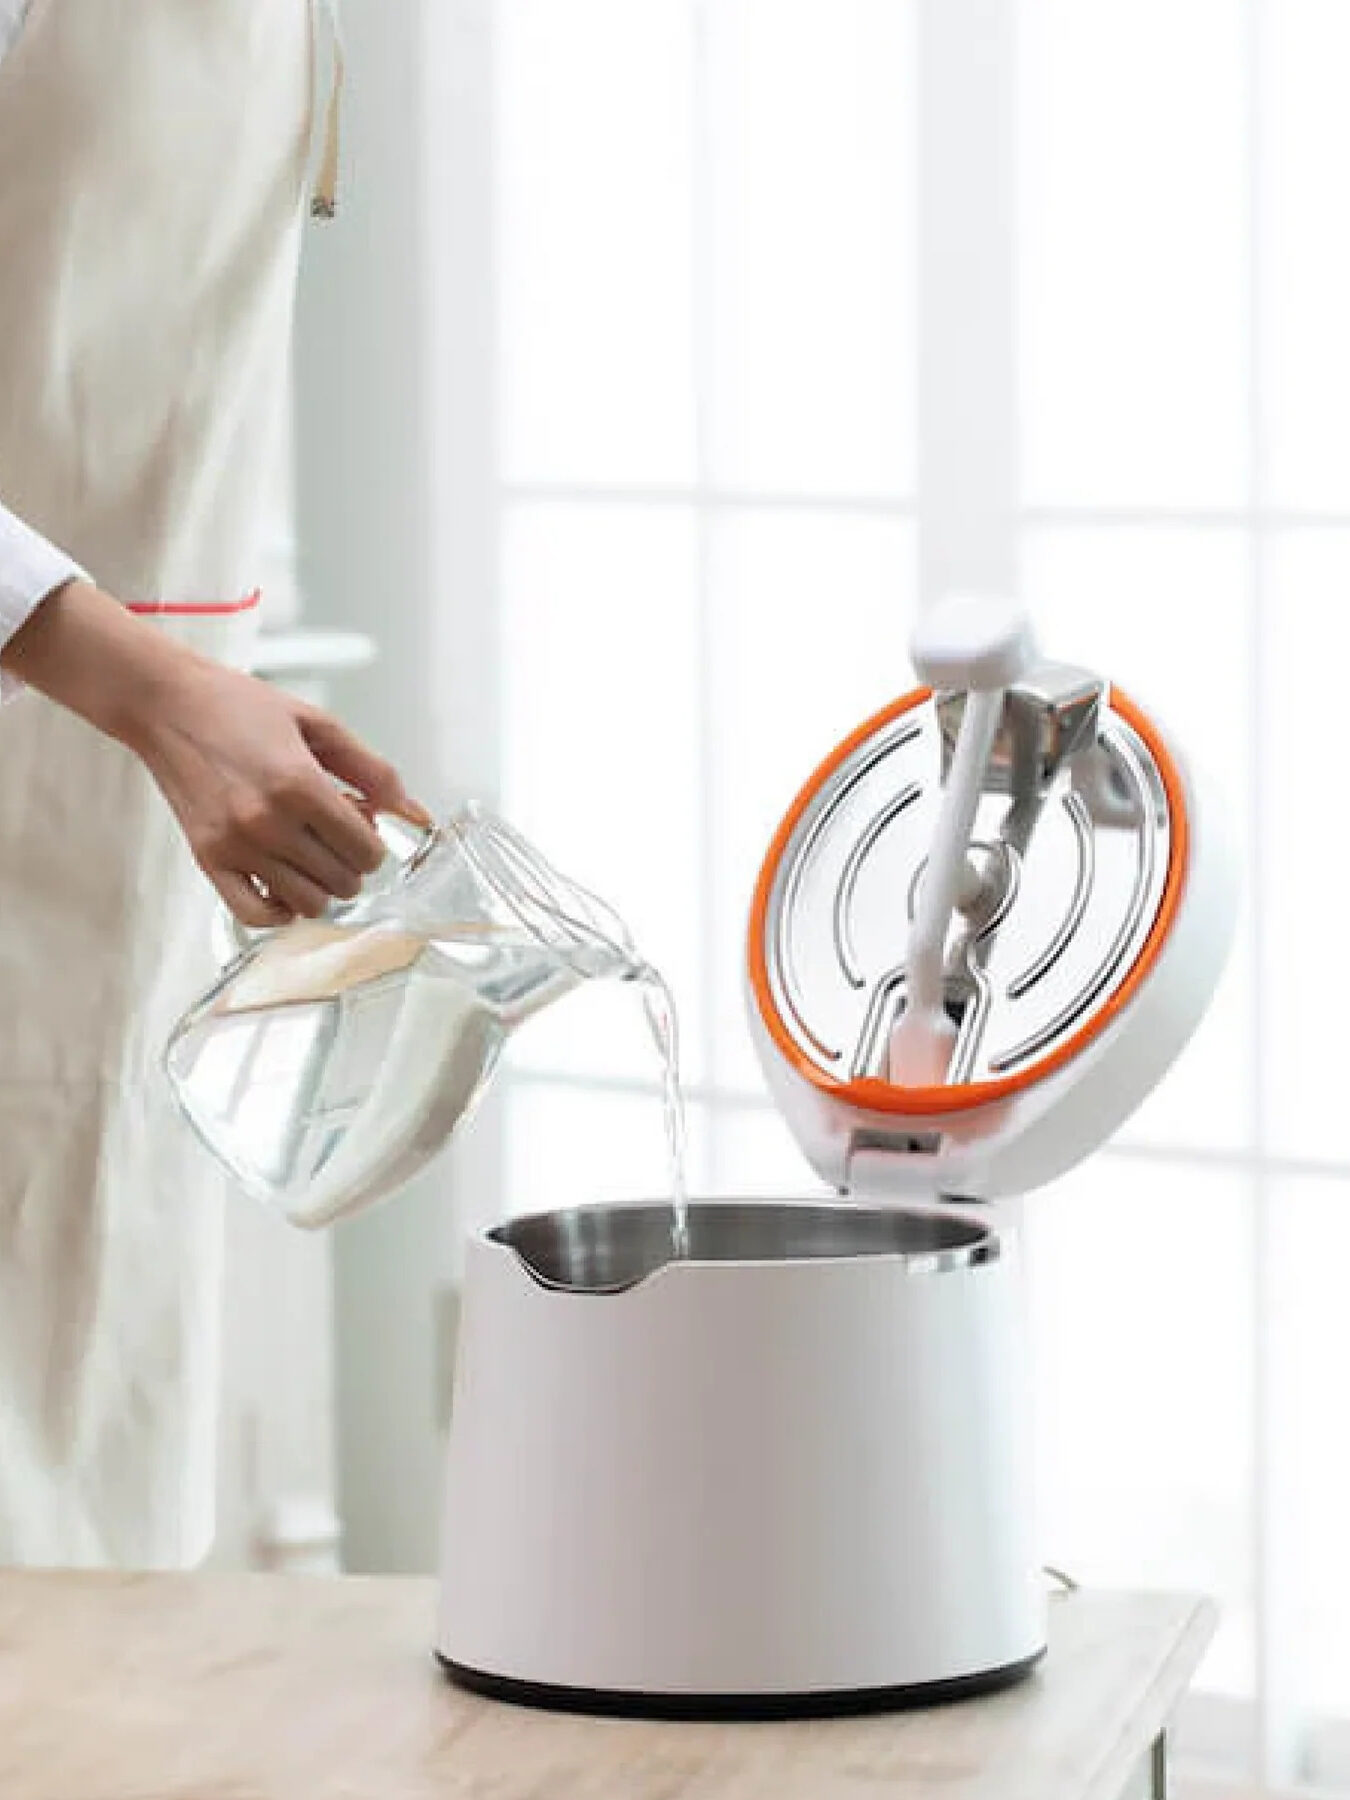 A Carepod Humidifier being refilled with water.